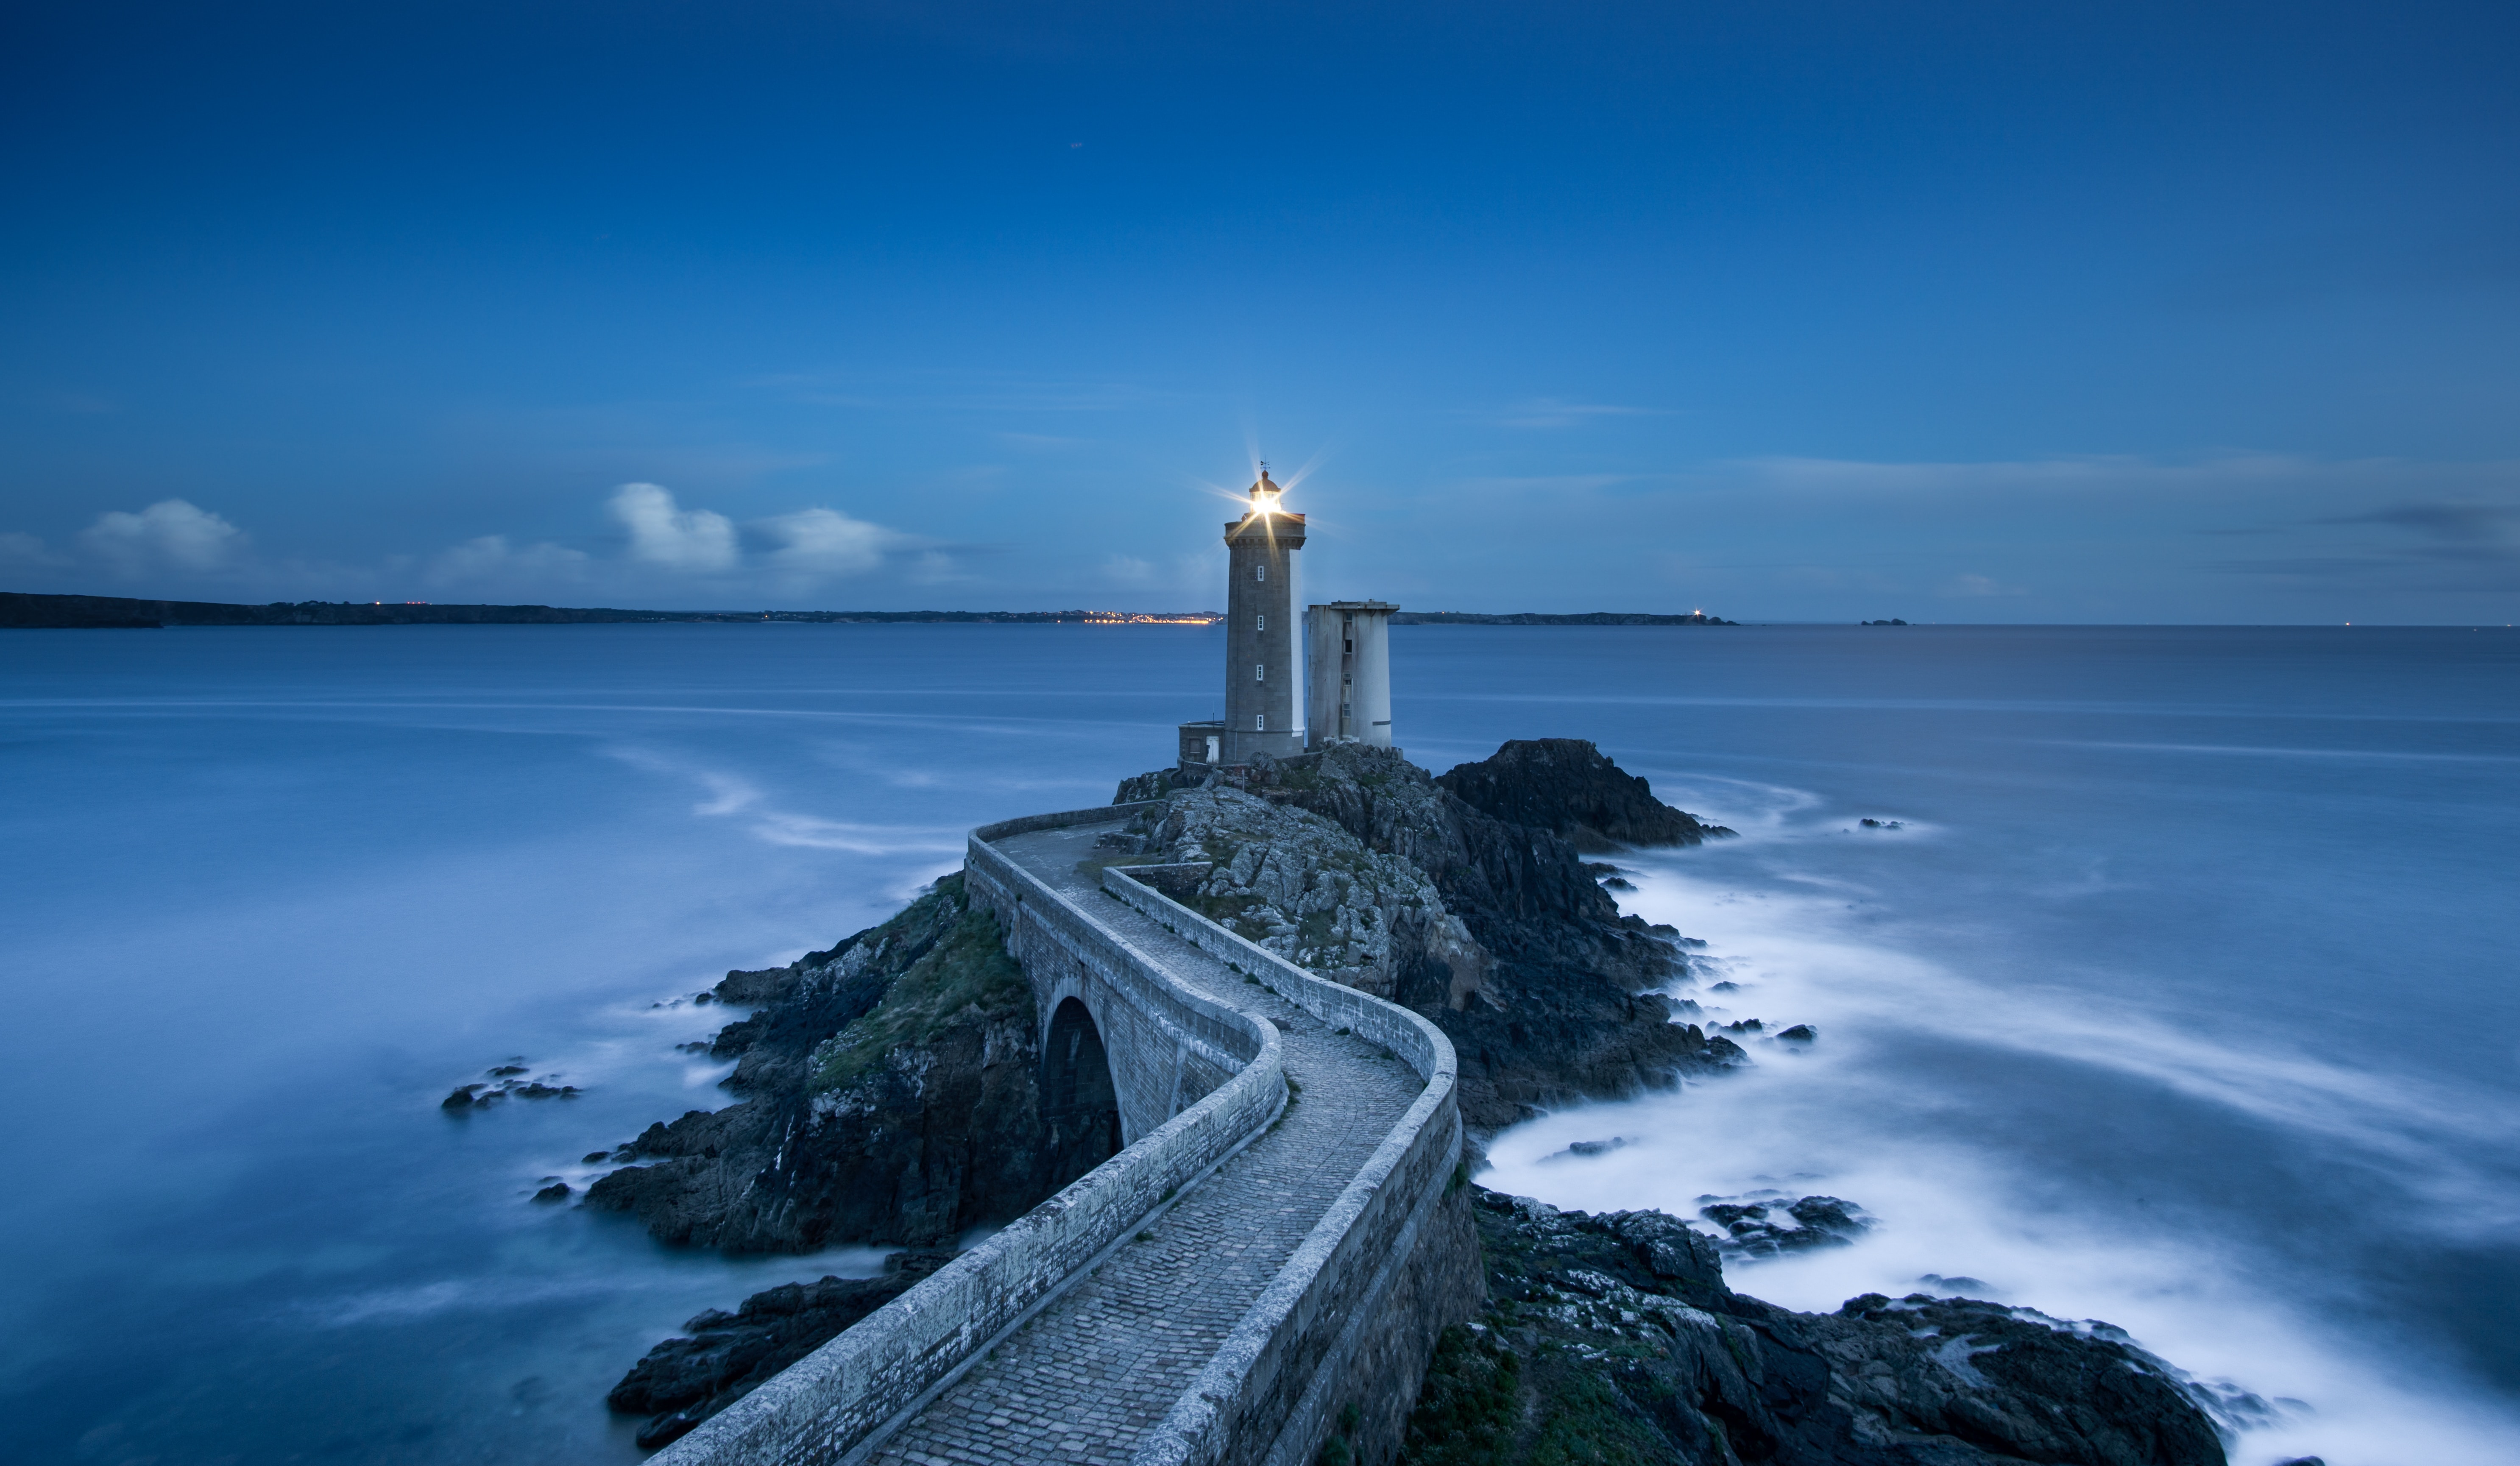 A winding stone path on a rocky outcrop leads to a small lighthouse. The light is shining in the darkness of blue hour.